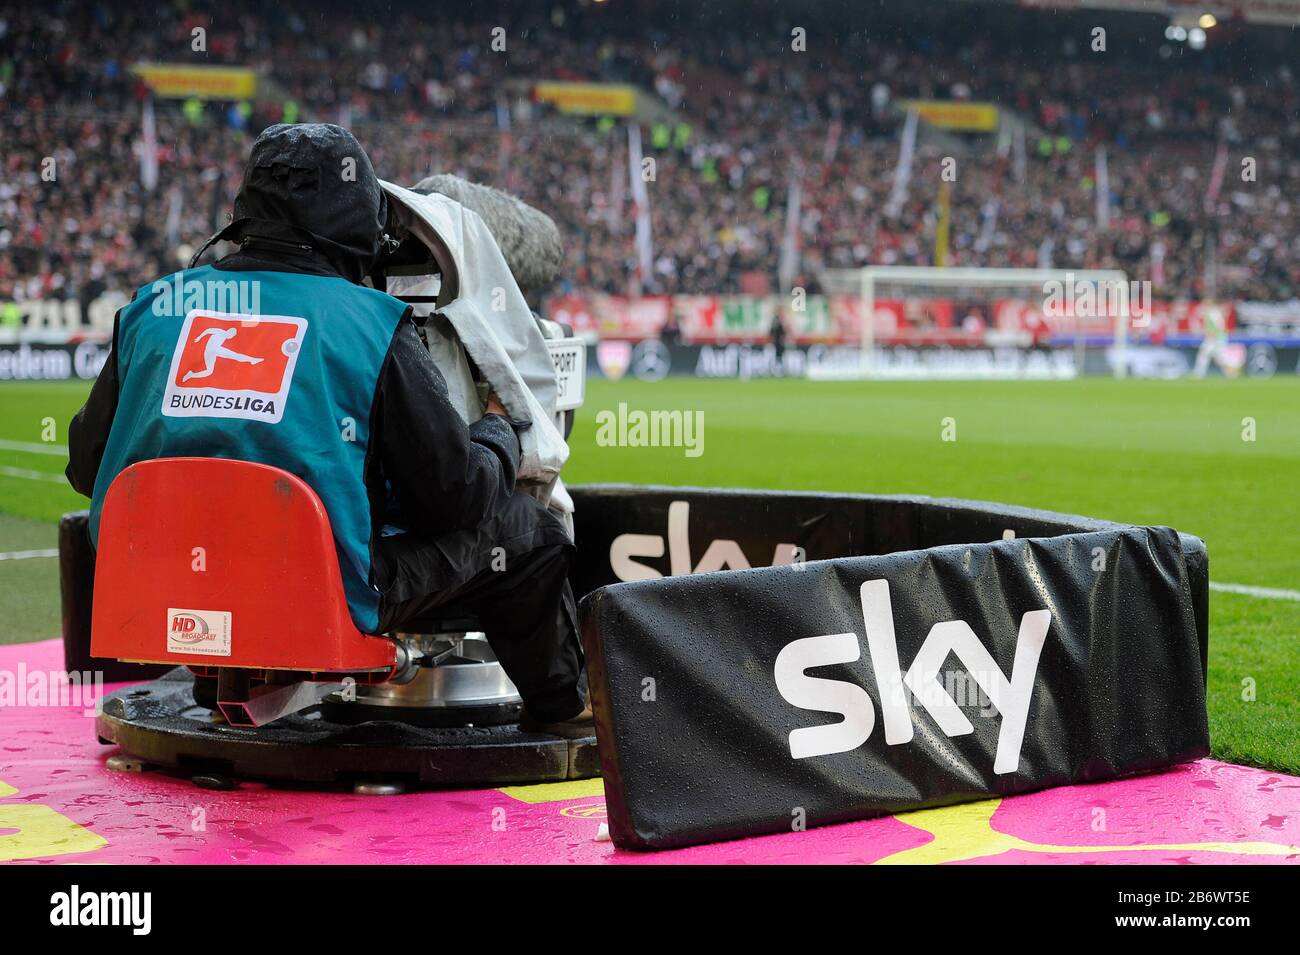 Sky Tv Camera Football High Resolution Stock Photography And Images Alamy